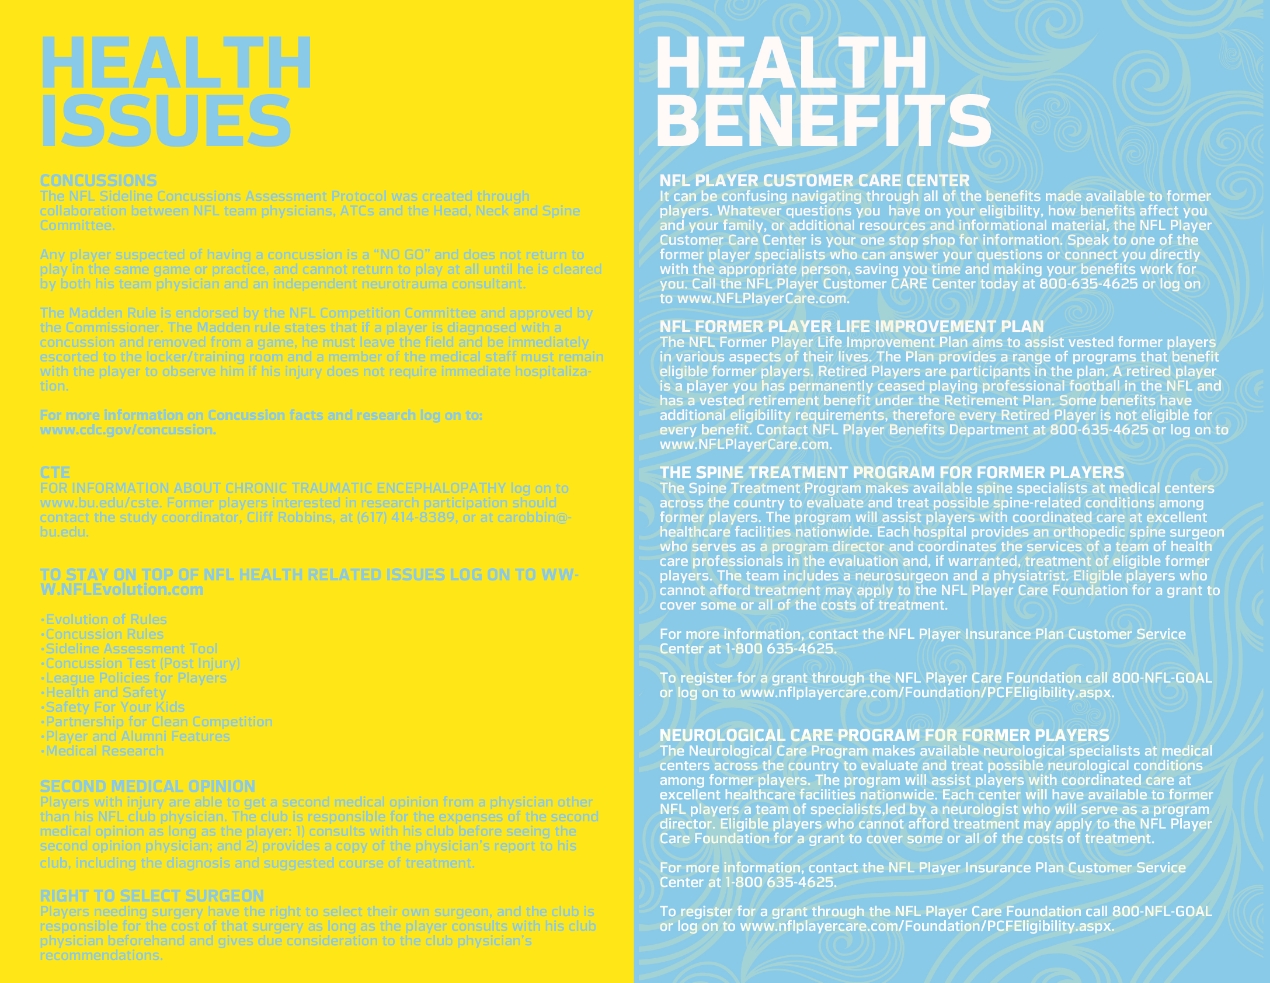 HEALTH ISSUES pages 3 and 4.jpg